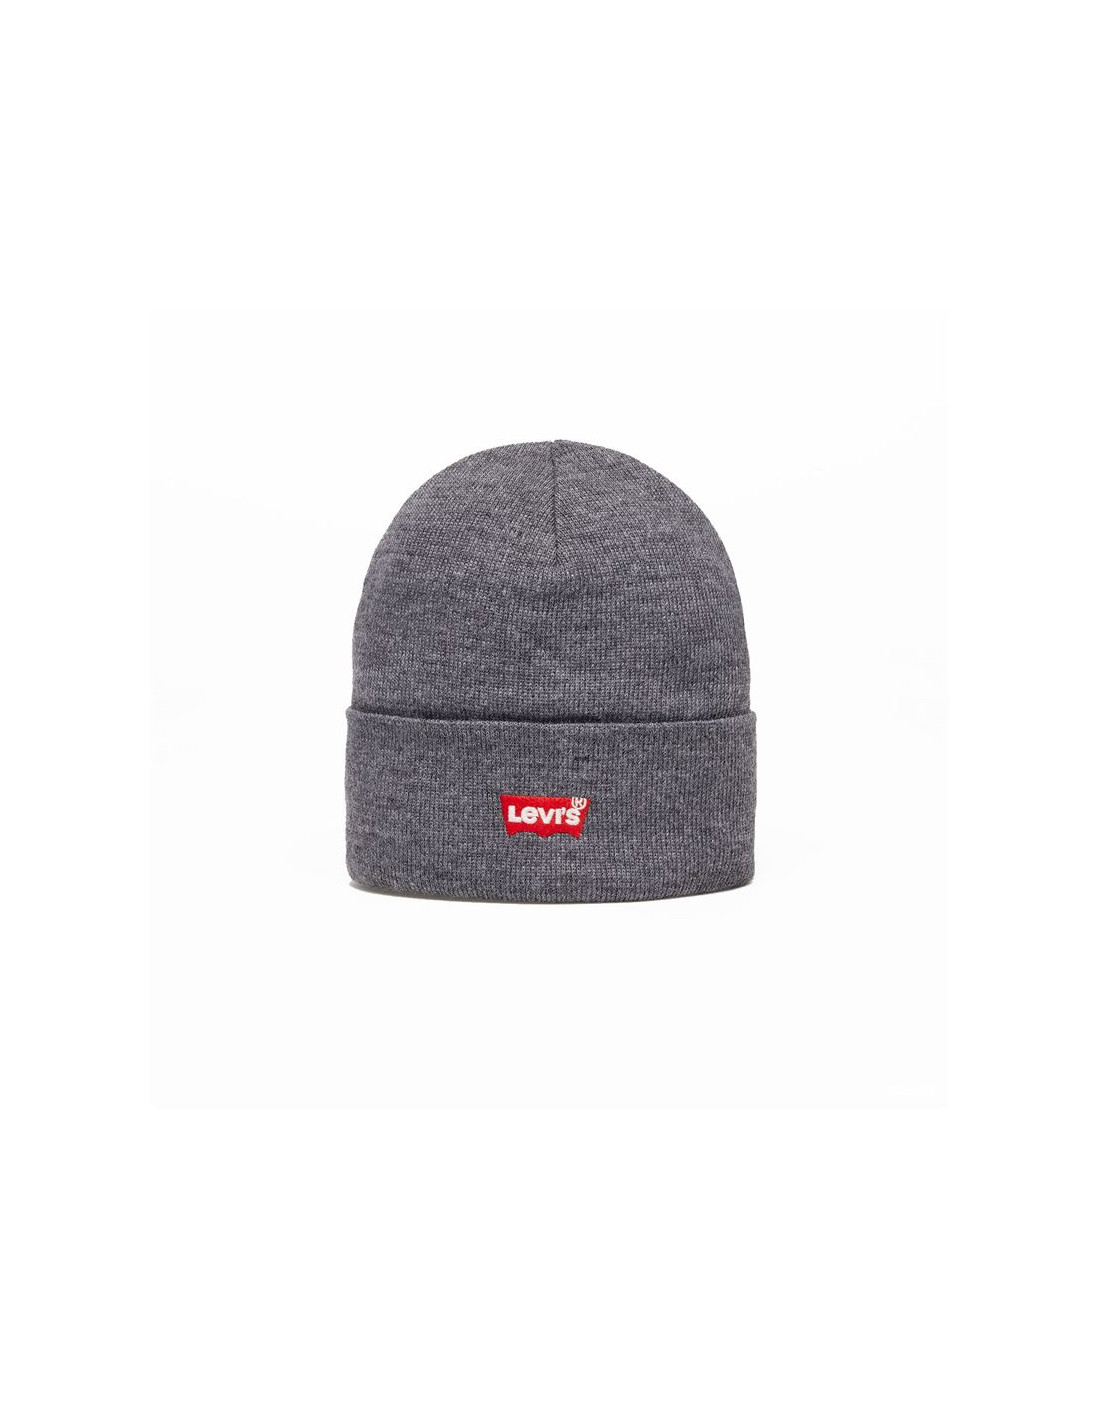 Gorro levi's red batwing embroidered beanie regular grey